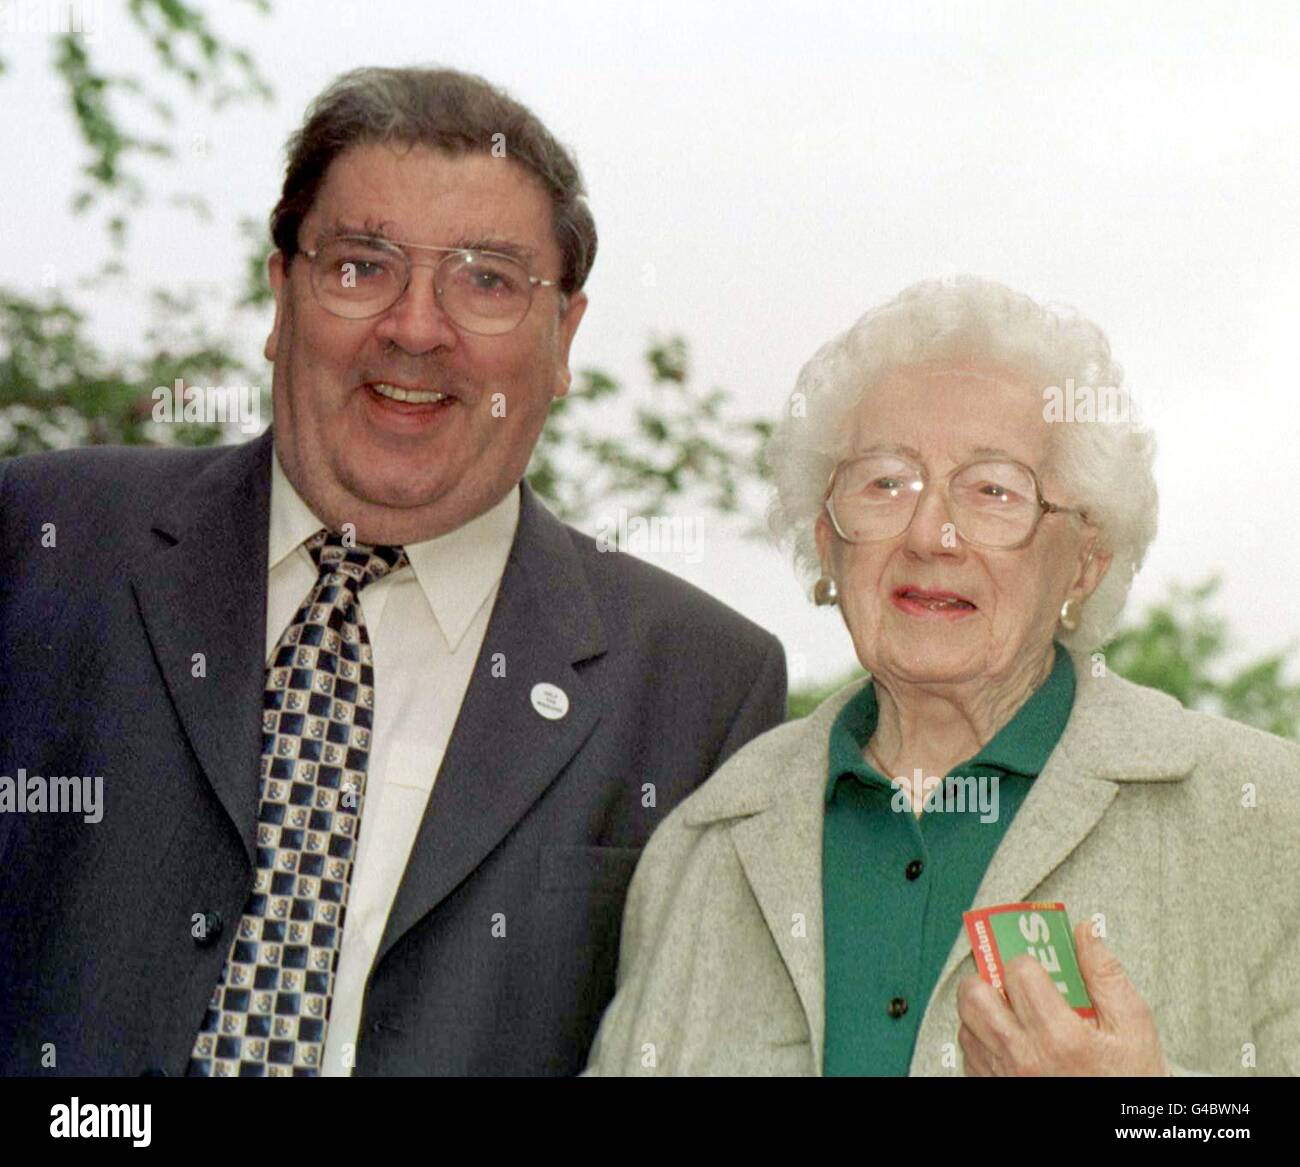 SDLP leader John Hume with Mary Hassan, aged 96, the great-aunt of former Eurovision Song Contest winner Dana at a polling station in Londonderry today (Friday) to vote in the referendum. Photo Barry Batchelor/PA. Stock Photo